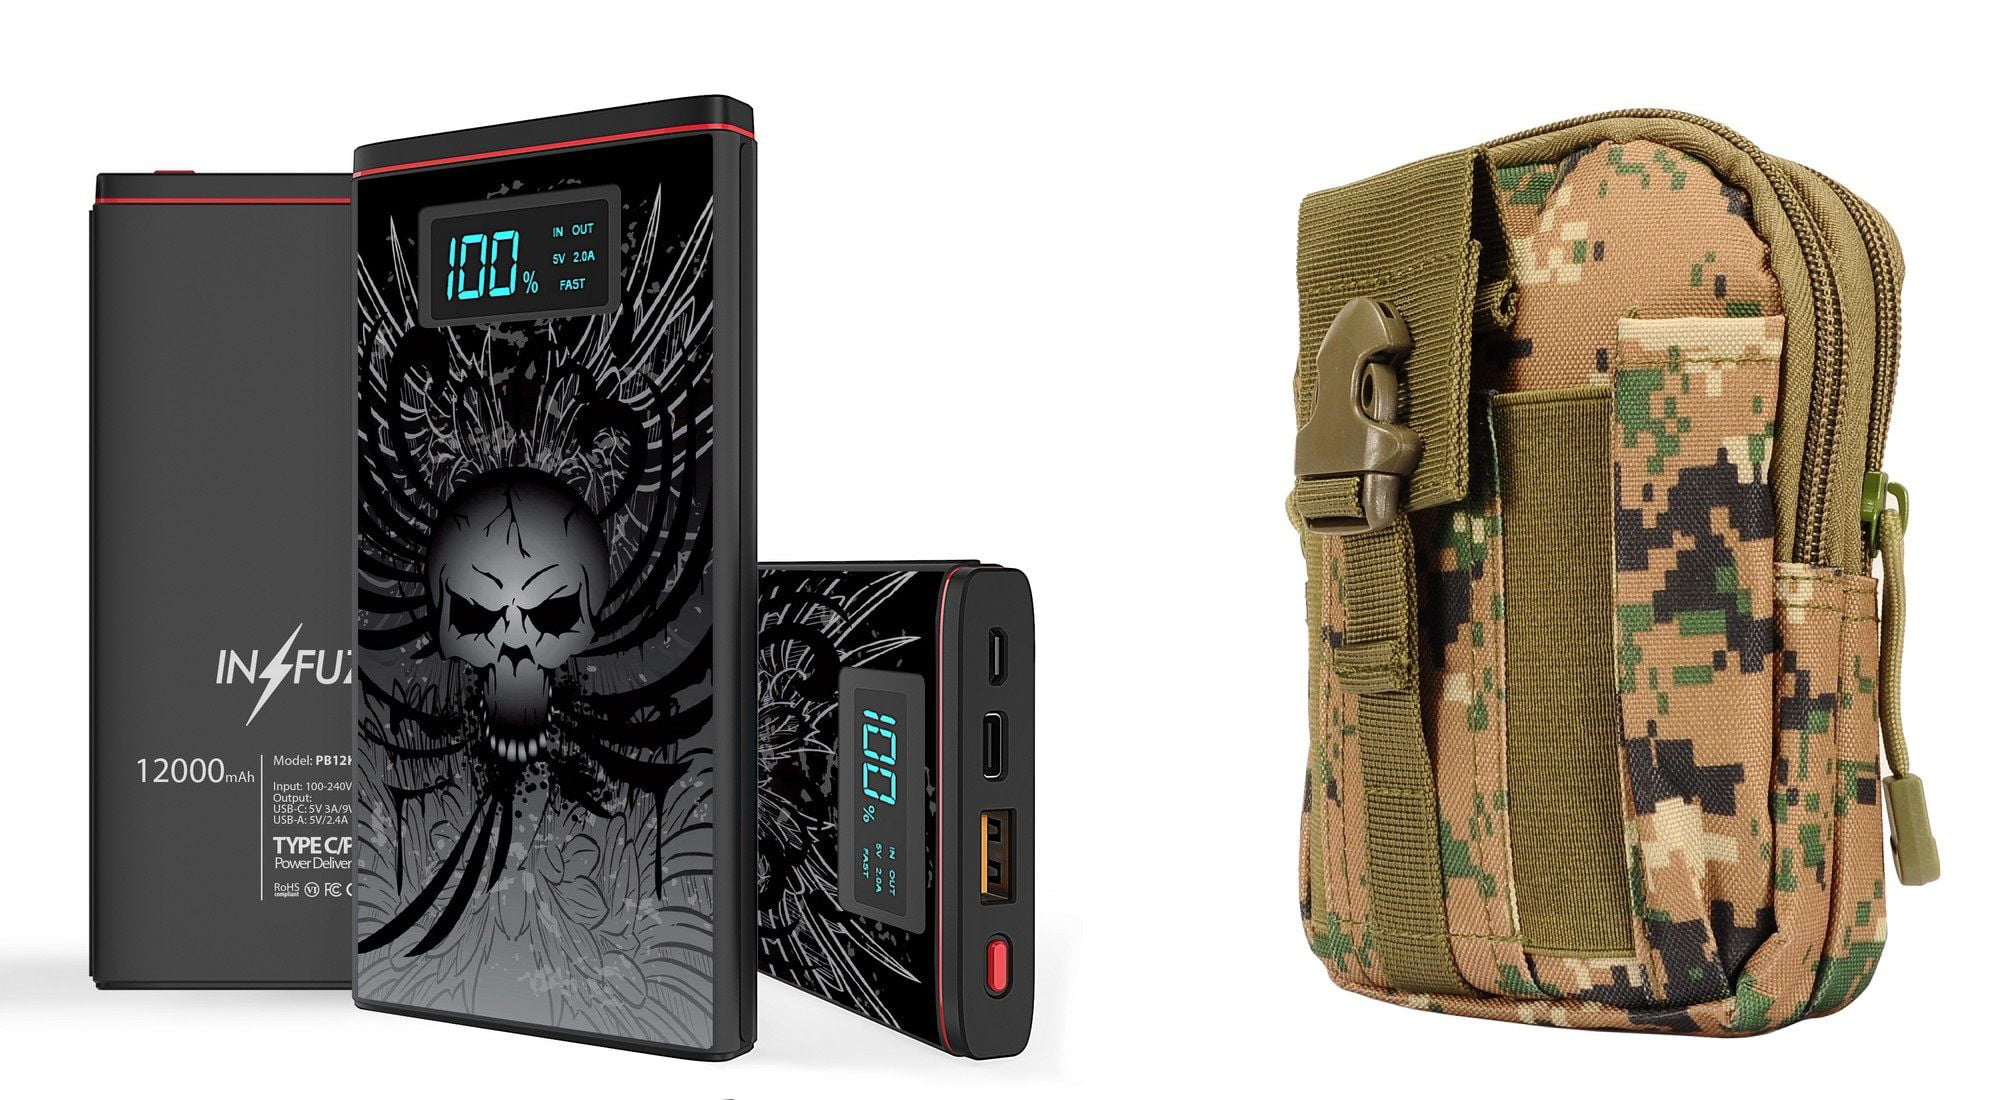 Camouflage Portable USB Power Bank Charger 